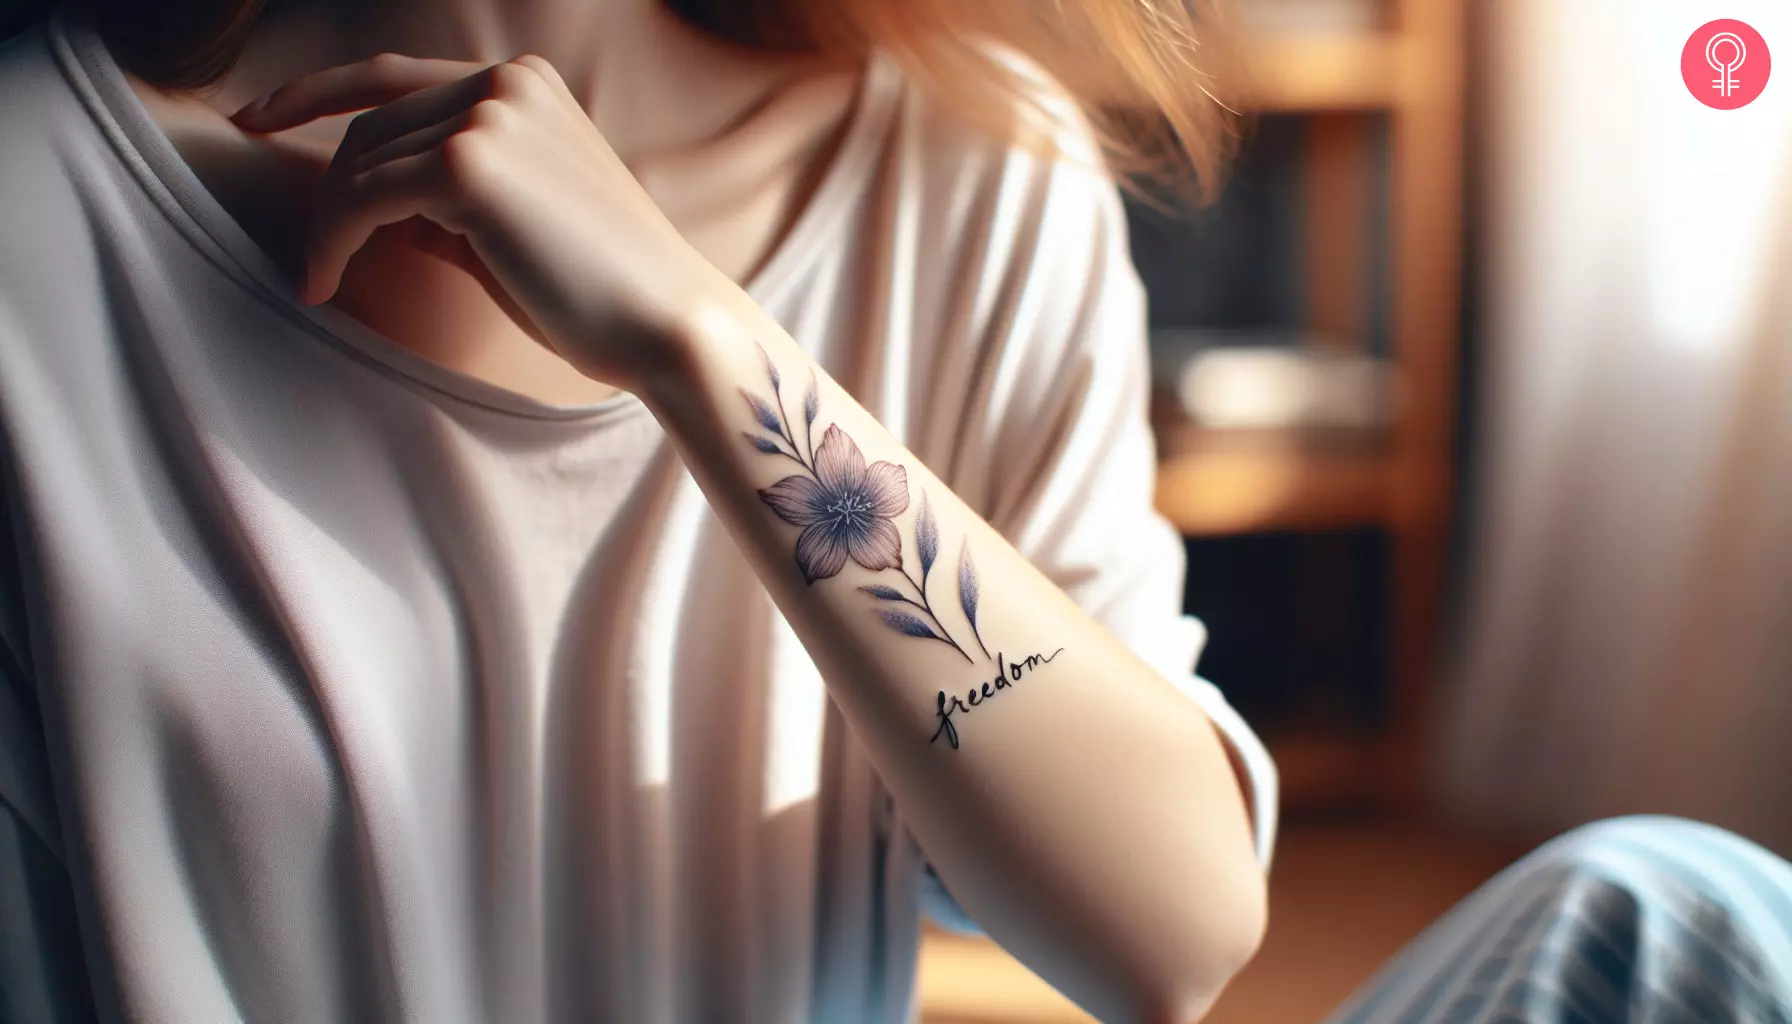 A woman with a freedom flower tattoo on her forearm